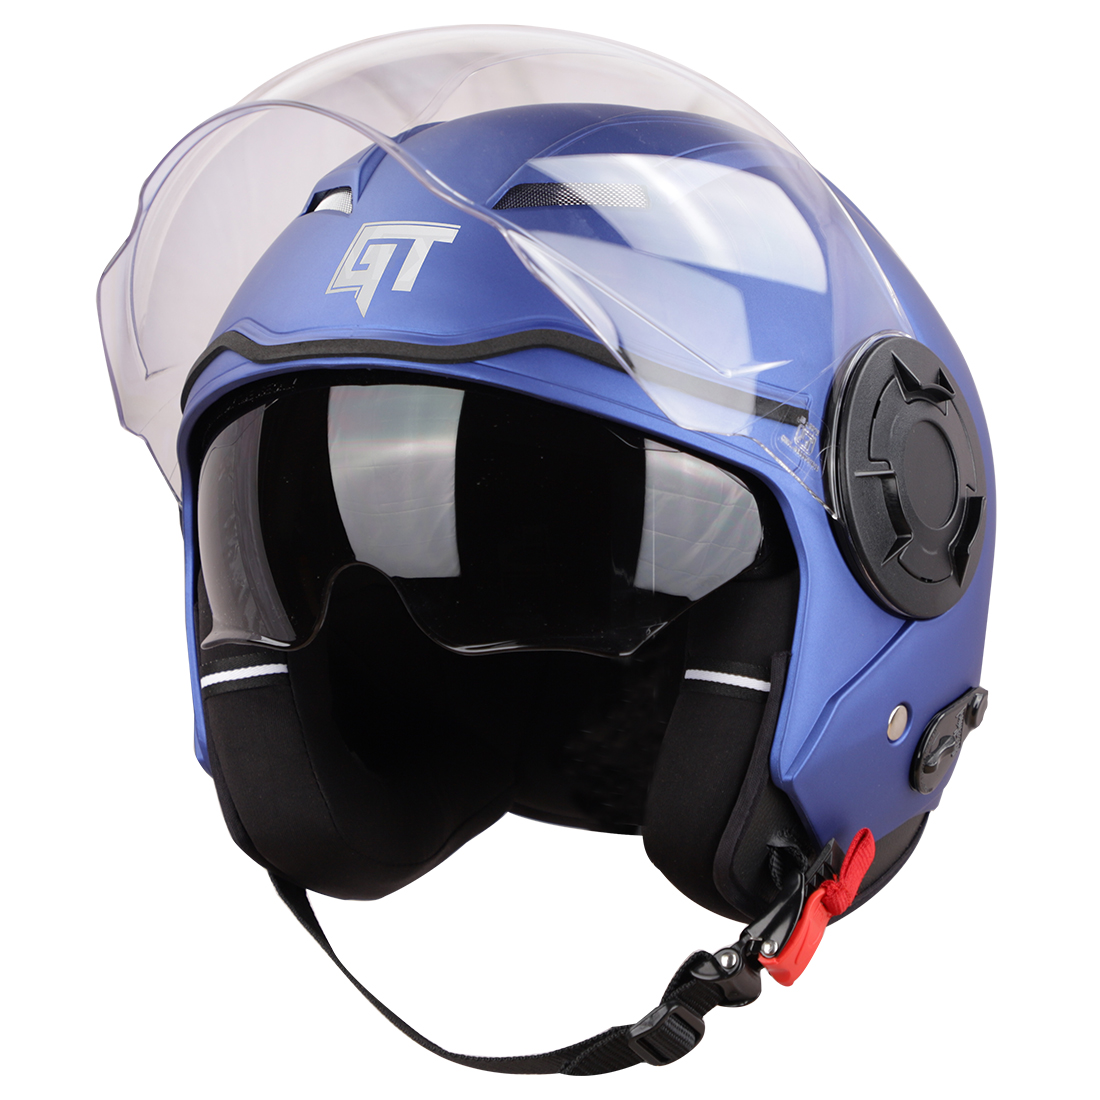 Steelbird GT ISI Certified Open Face Helmet For Men And Women With Inner Sun Shield ( Dual Visor Mechanism ) (Glossy Y.Blue)